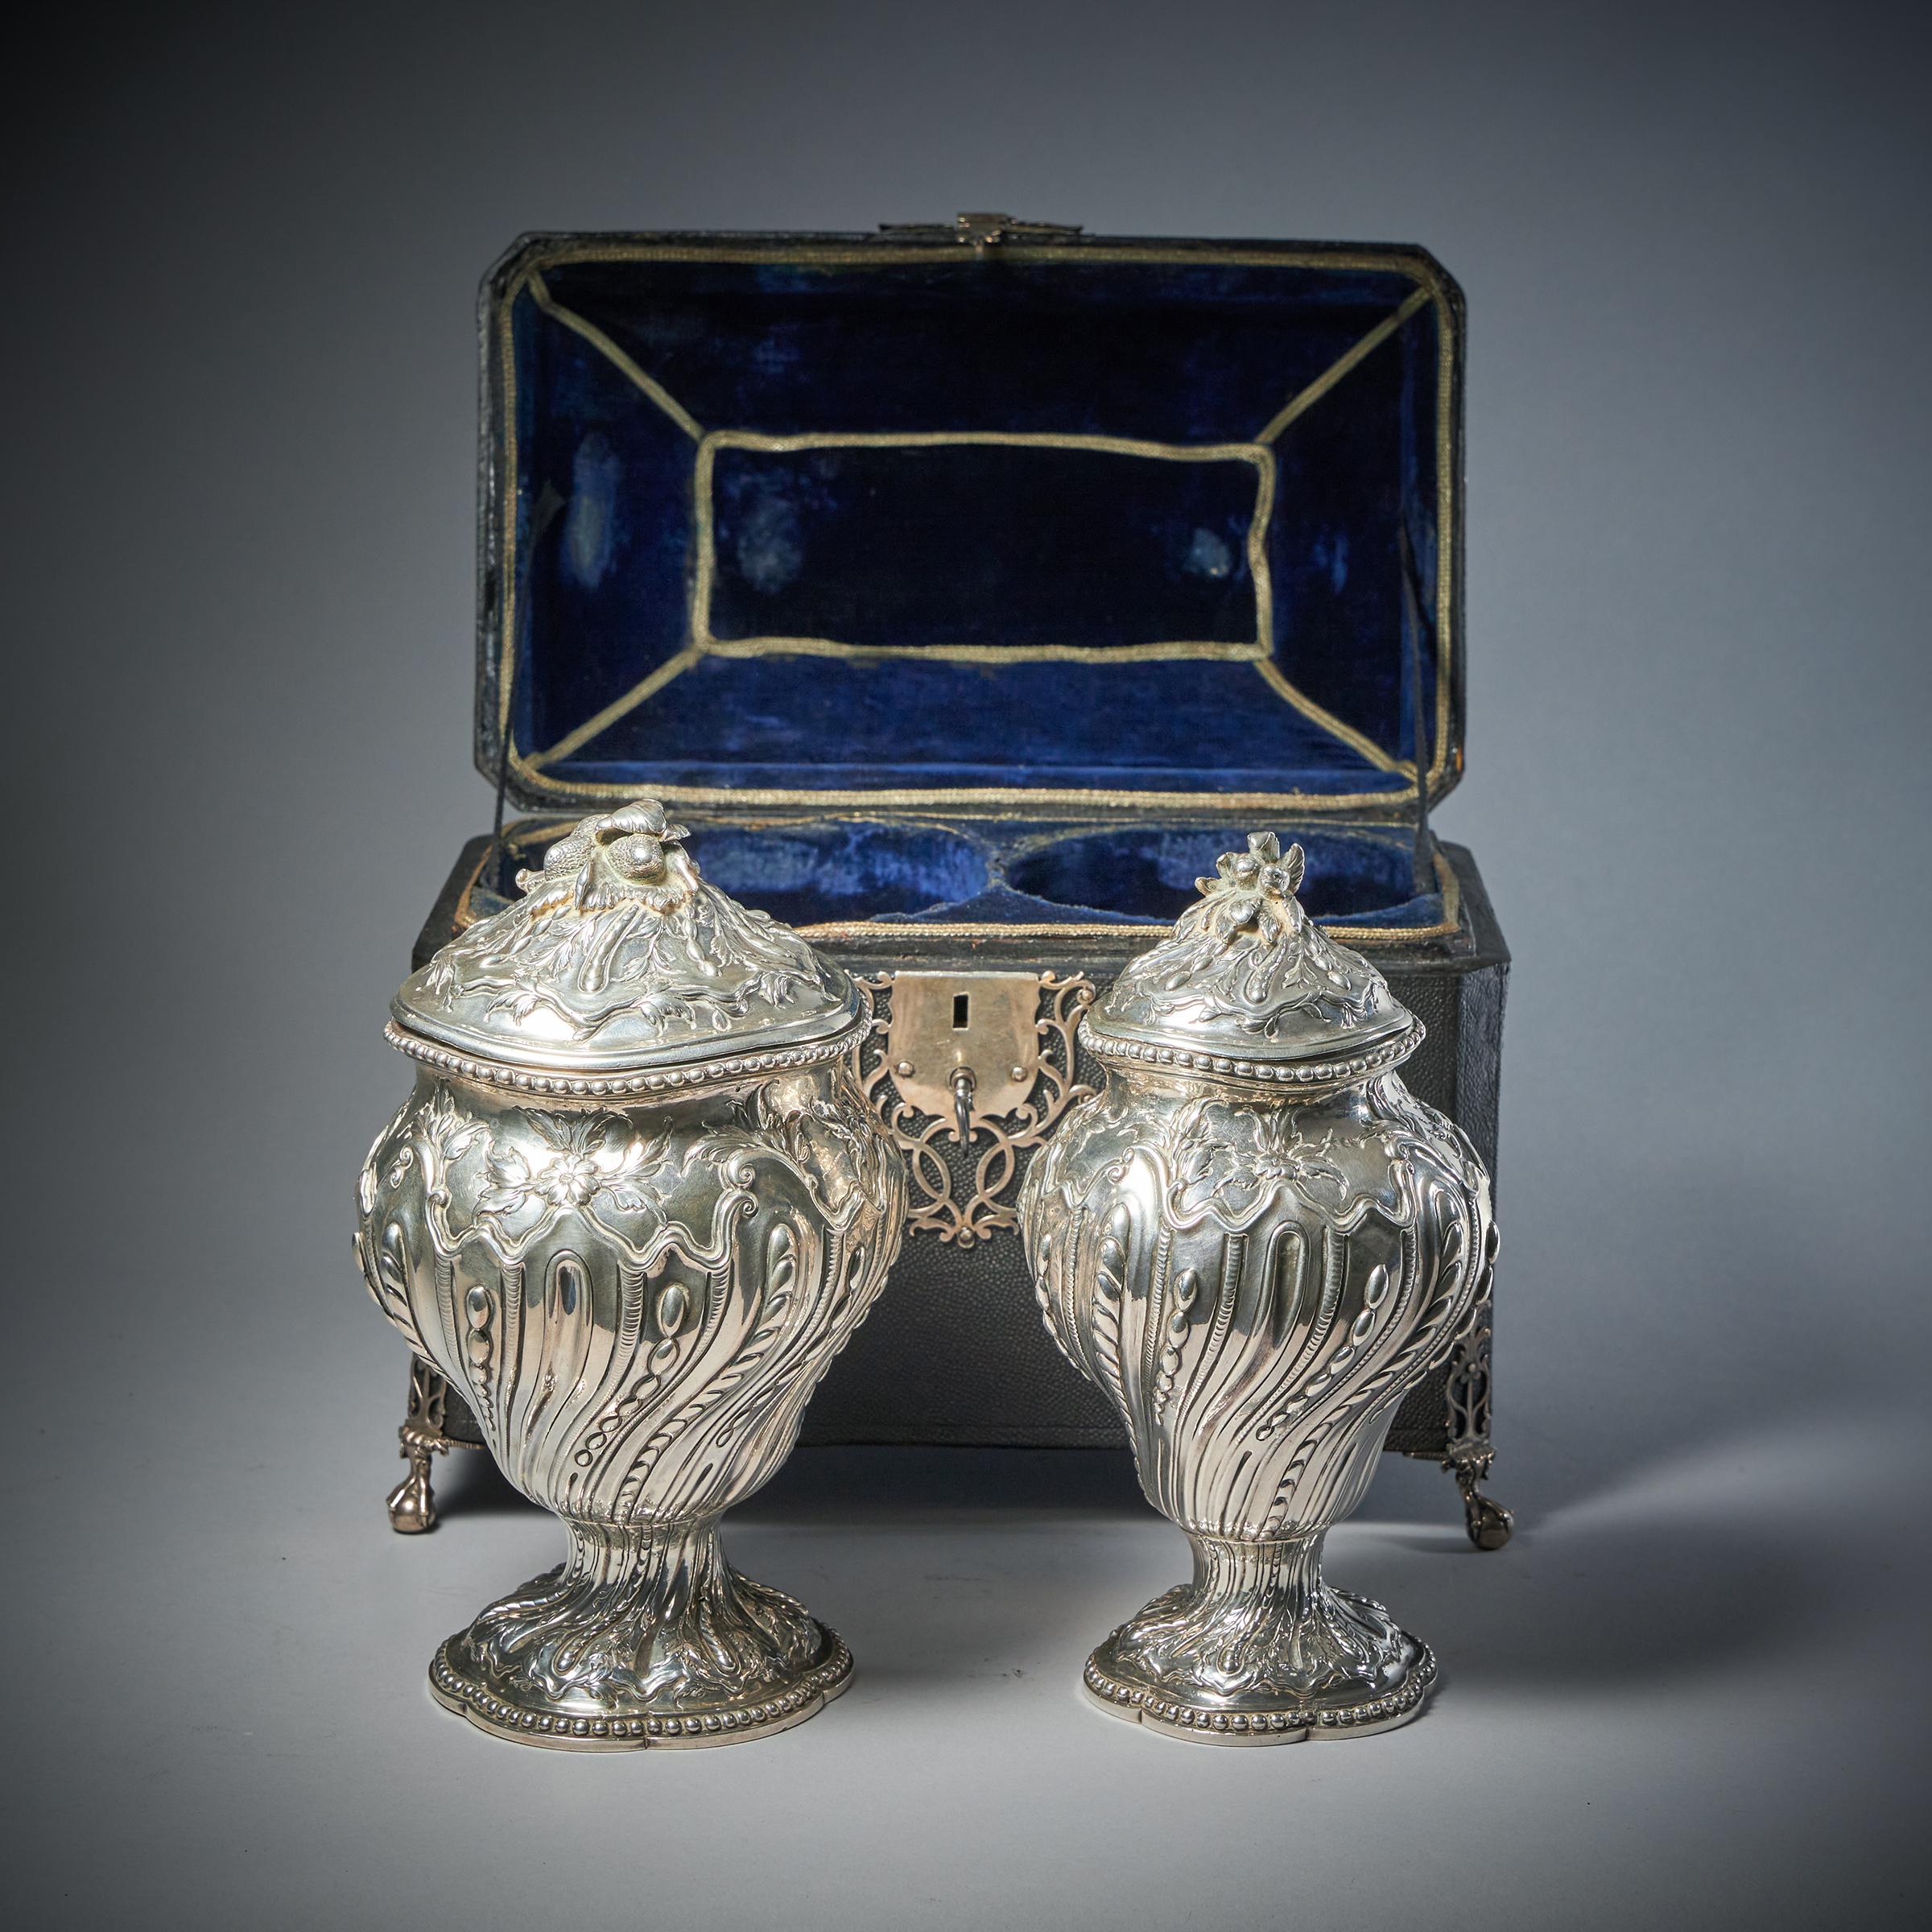 A Rare Silver Mounted George II Shagreen Tea Caddy with Silver Rocco Canistors-6